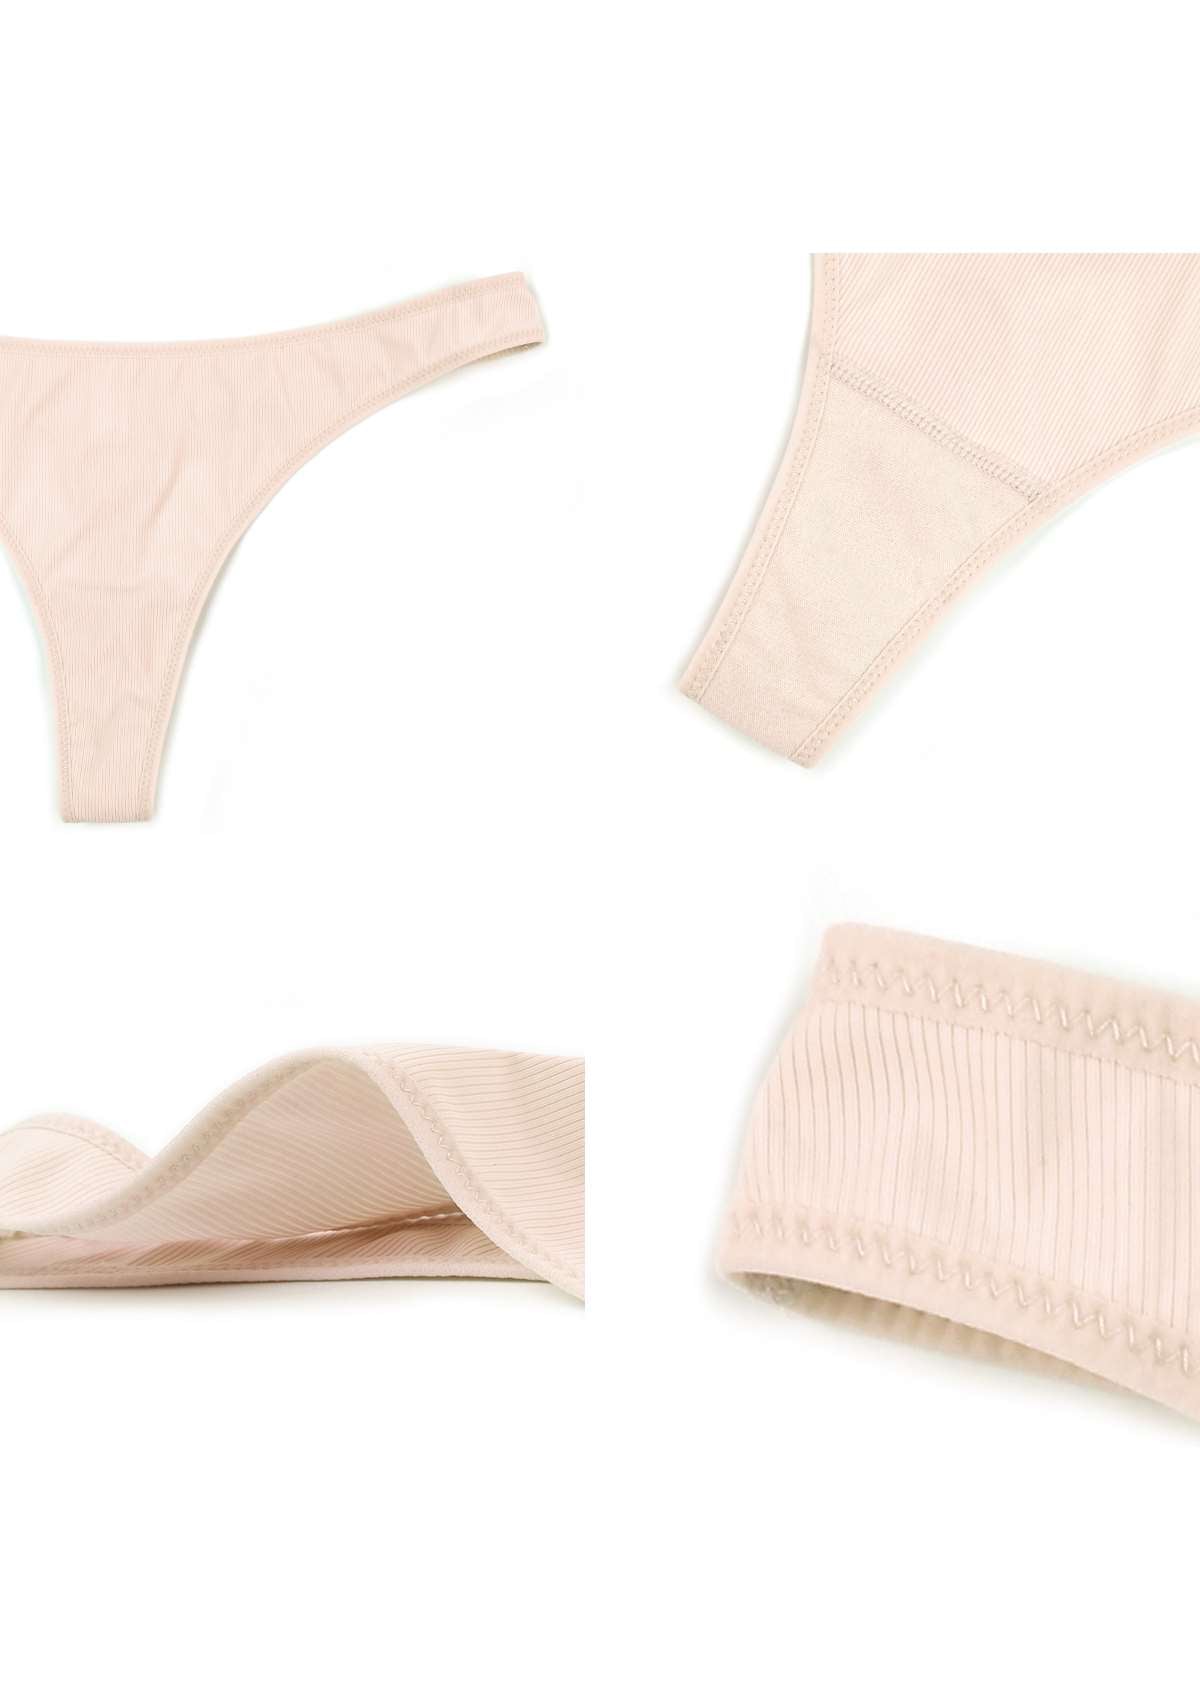 HSIA Ribbed Knit Cotton Thong Underwear 3 Pack - XL / Black+White+Pink Beige